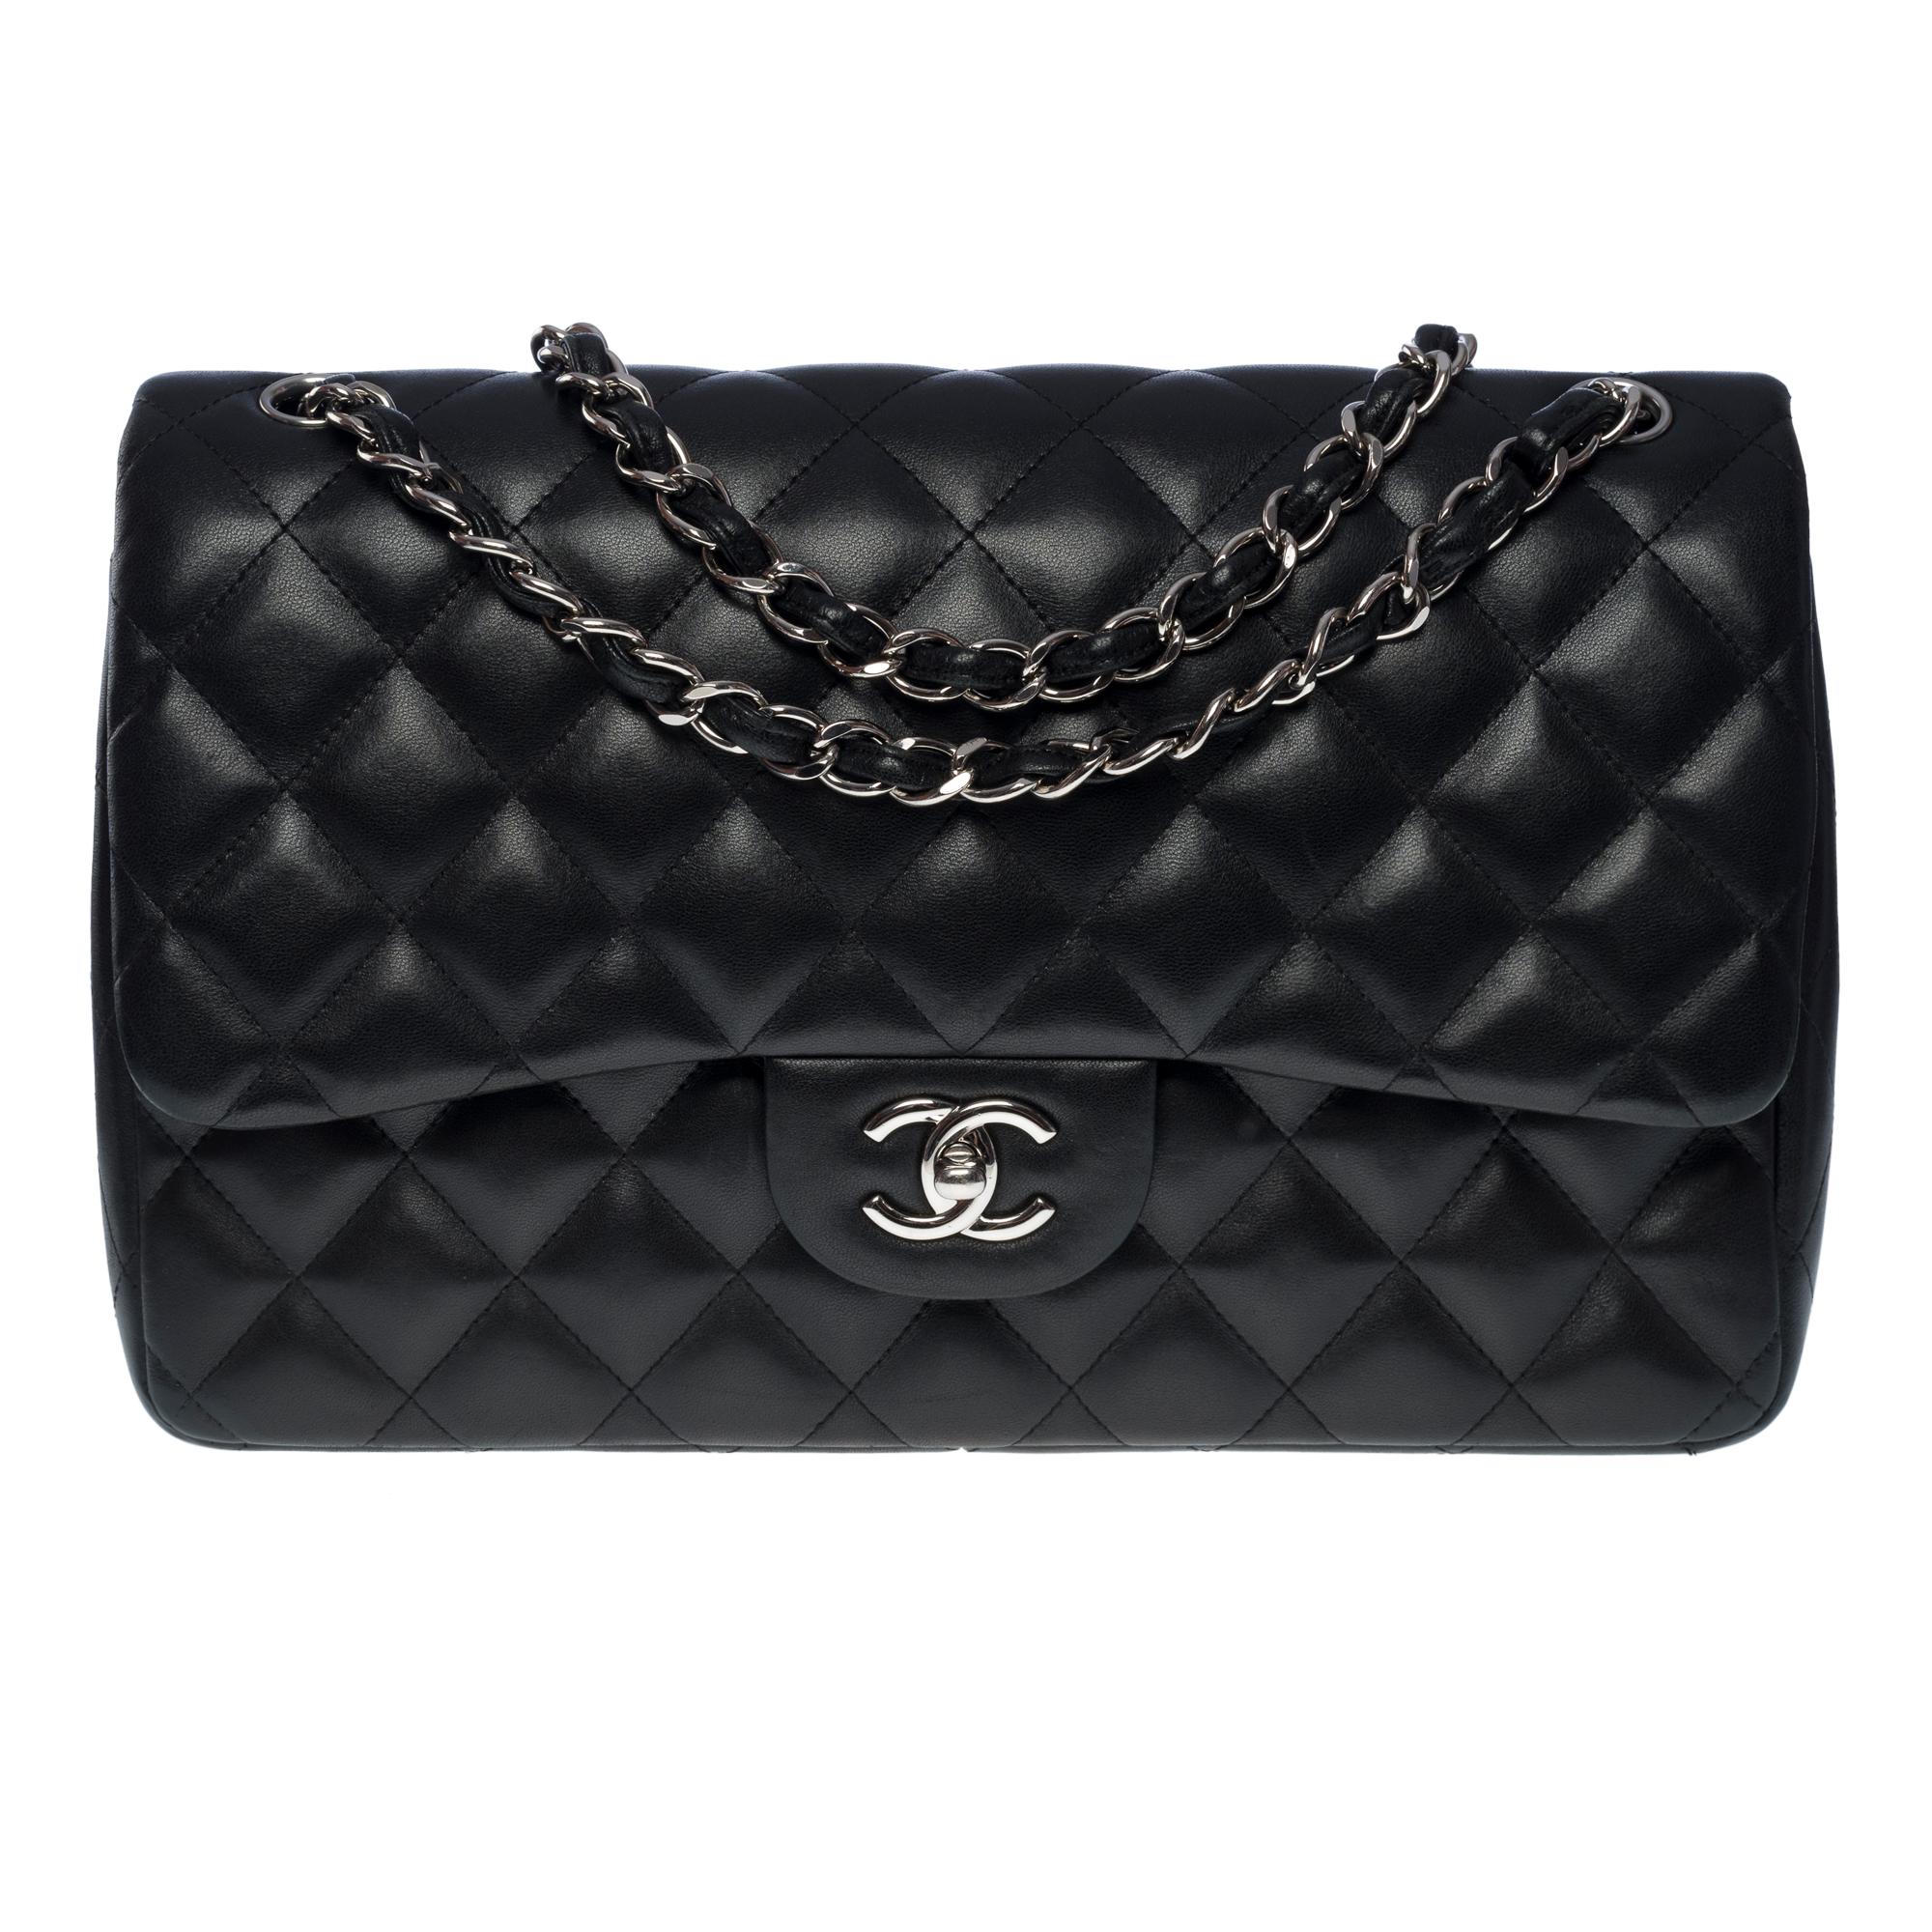 Fantastic Chanel Timeless Jumbo double flap shoulder bag  in black quilted lambskin leather, silver metal hardware, silver metal chain handle interlaced with black leather for hand support, Shoulder and crossbody carry

A patch pocket on the back of